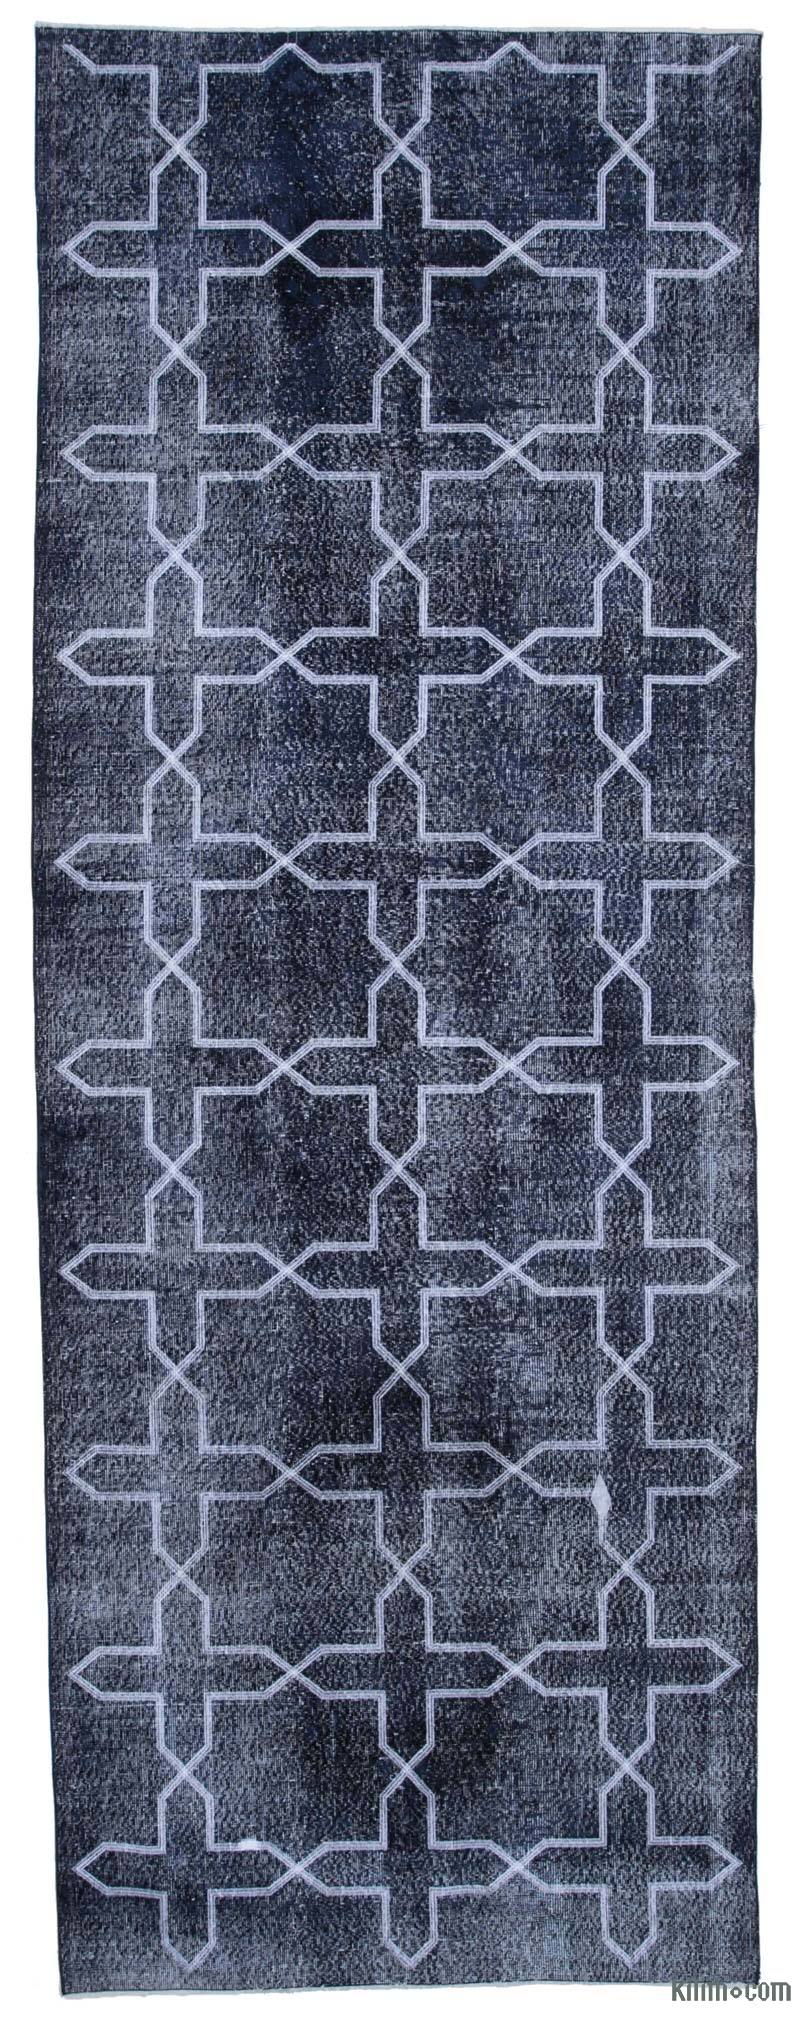 Black Embroidered Over-dyed Turkish Vintage Runner - 4' 7" x 12' 7" (55 in. x 151 in.) - K0038797